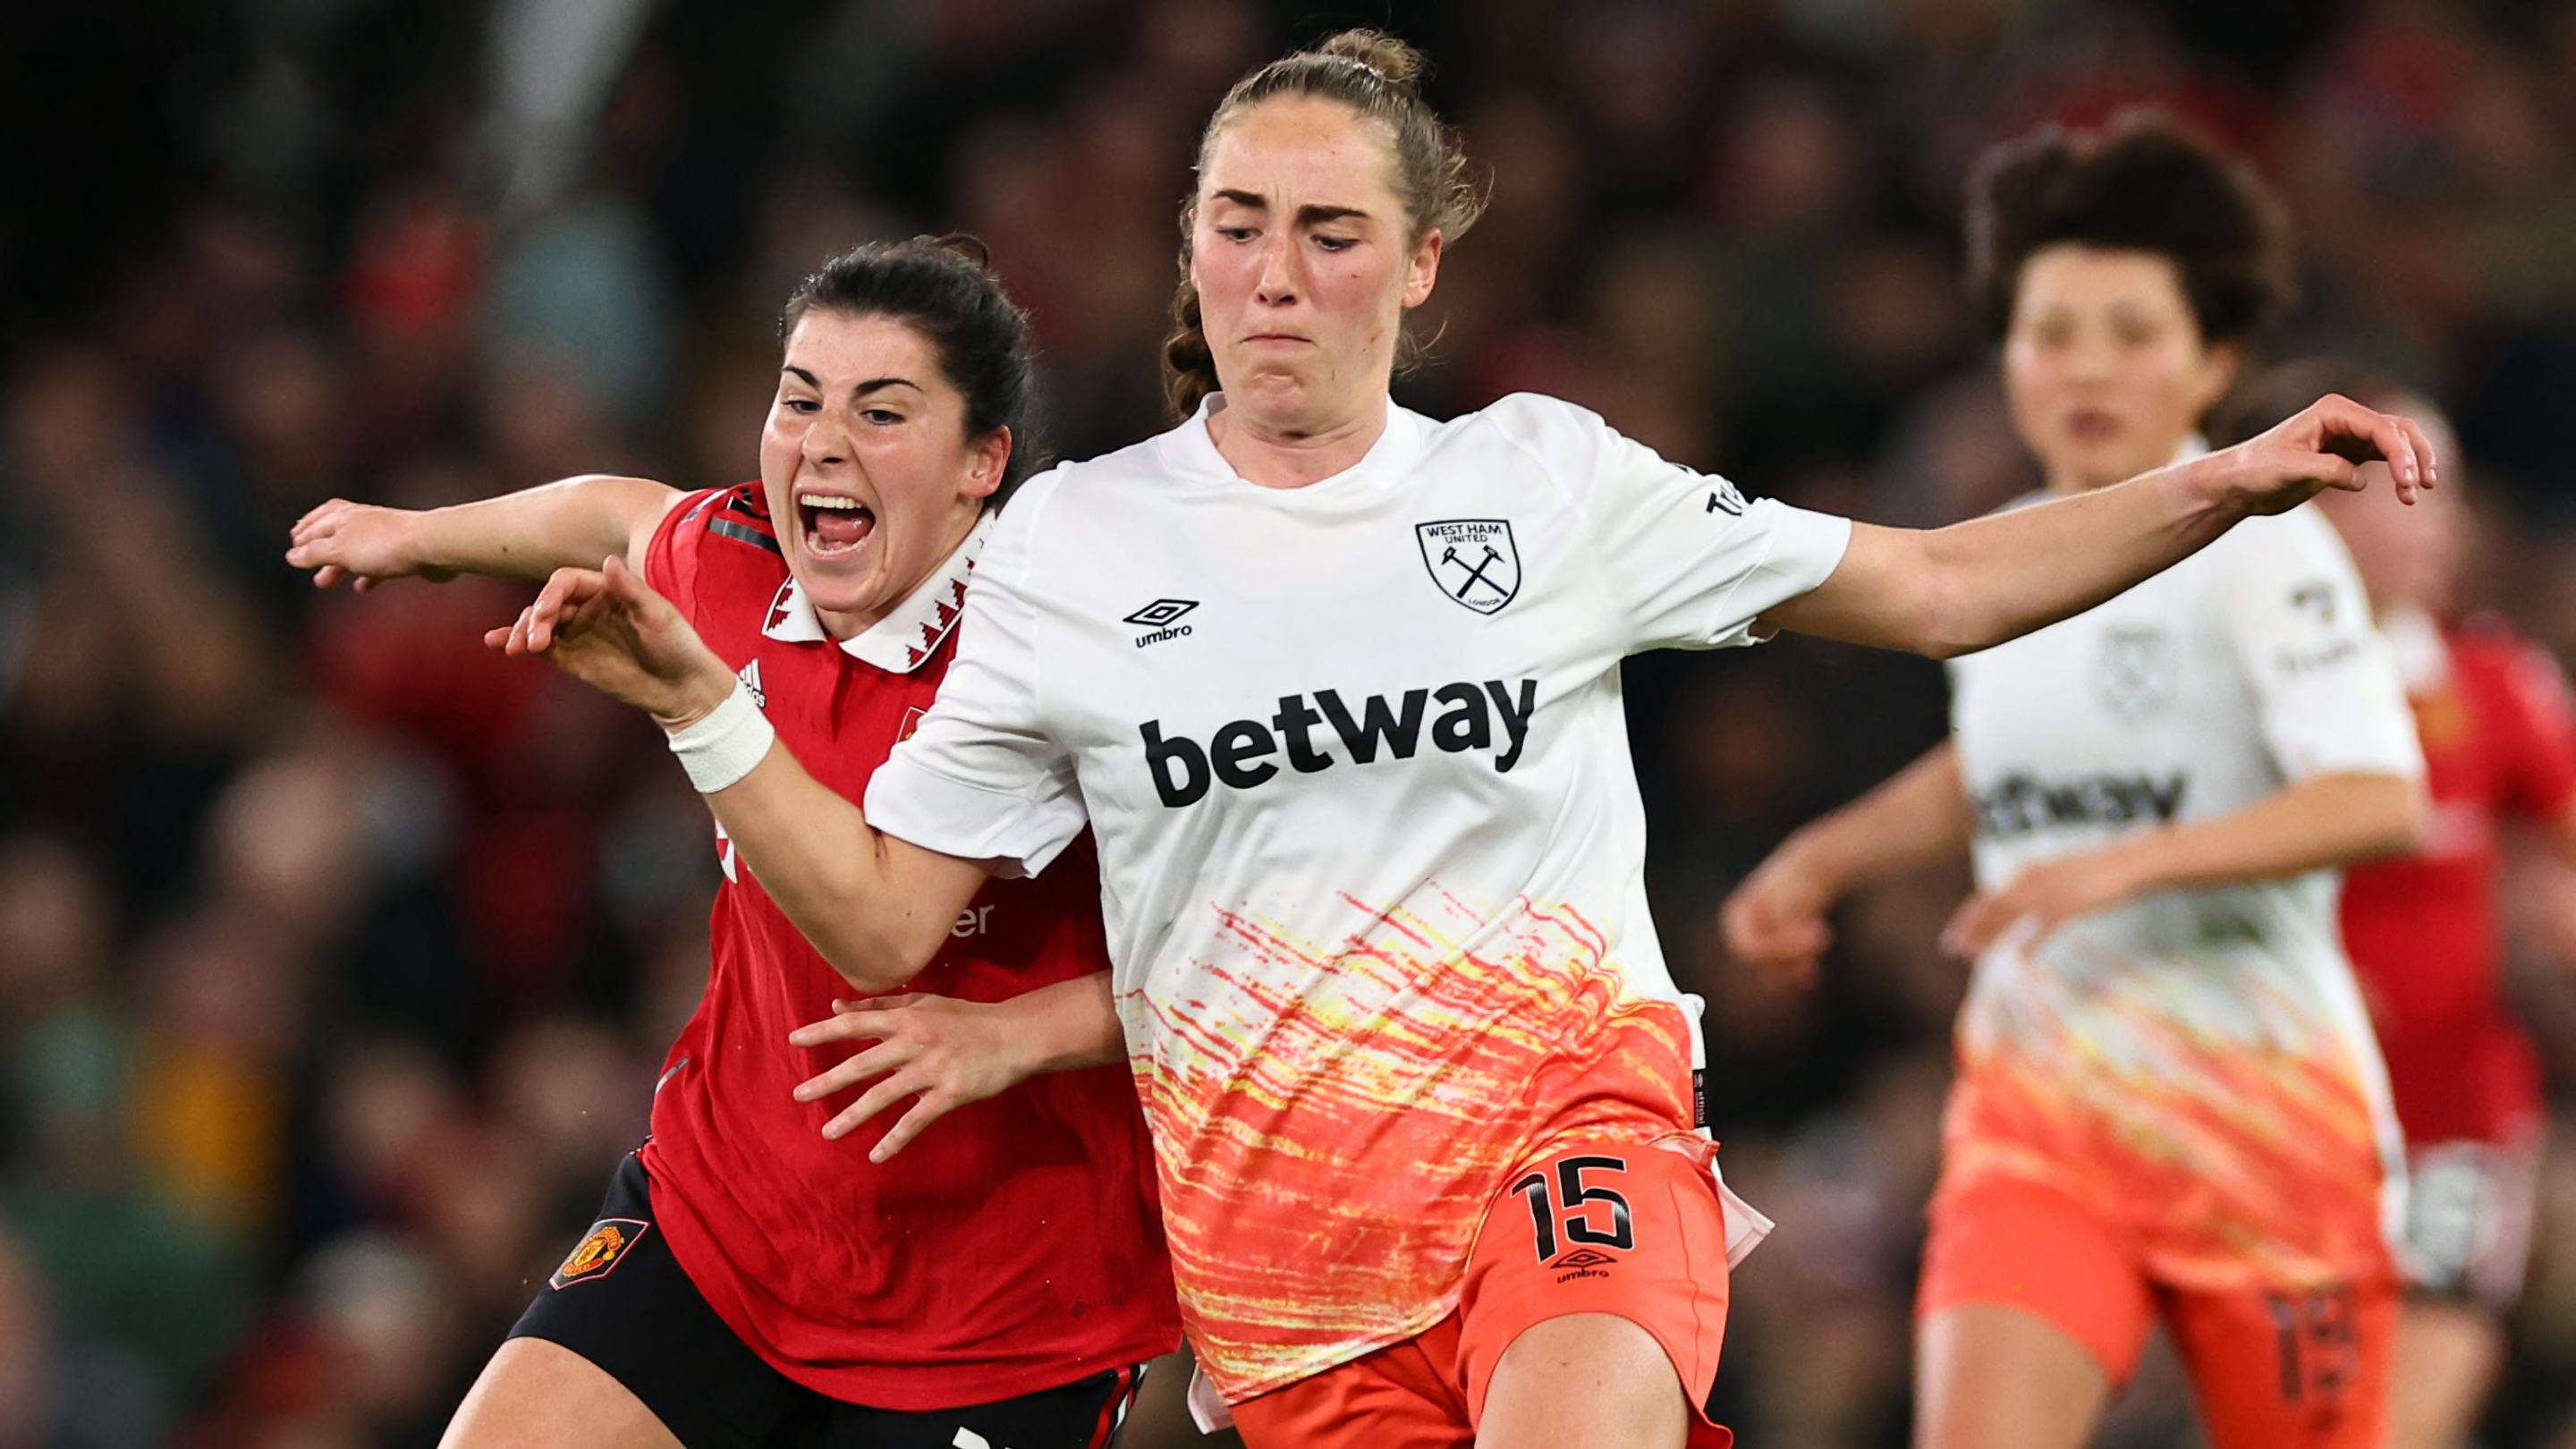 Lucy Parker calls out West Ham over lack of London Stadium games